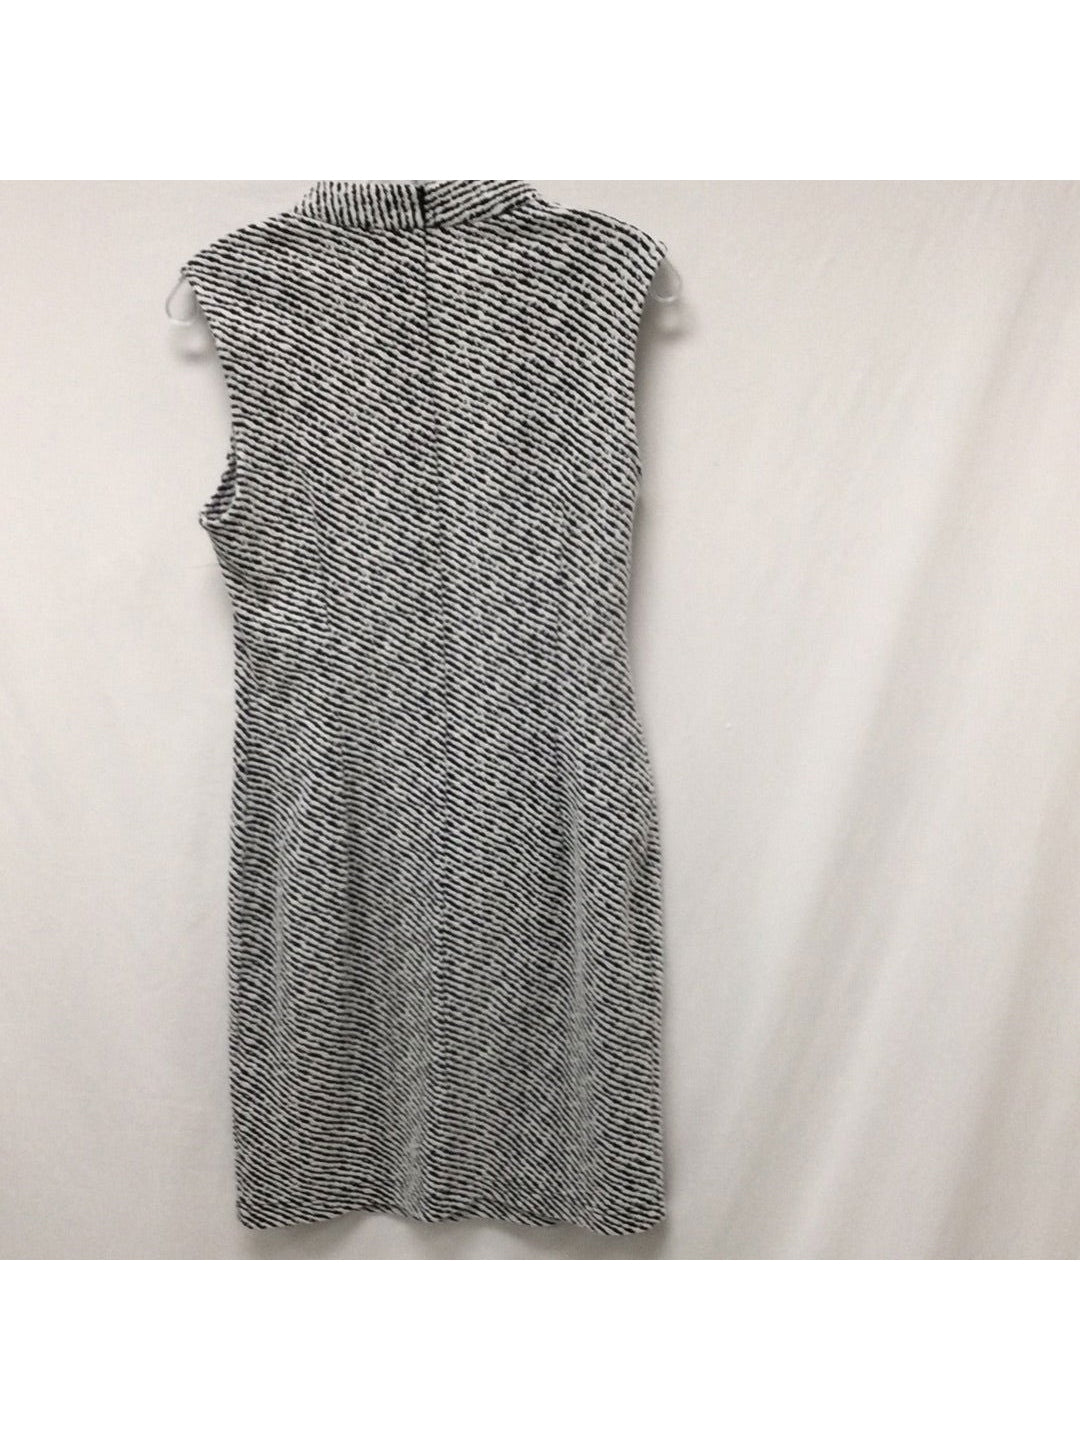 Sharagango Women Black And White Sleeveless Dress Size 6 - The Kennedy Collective Thrift - 